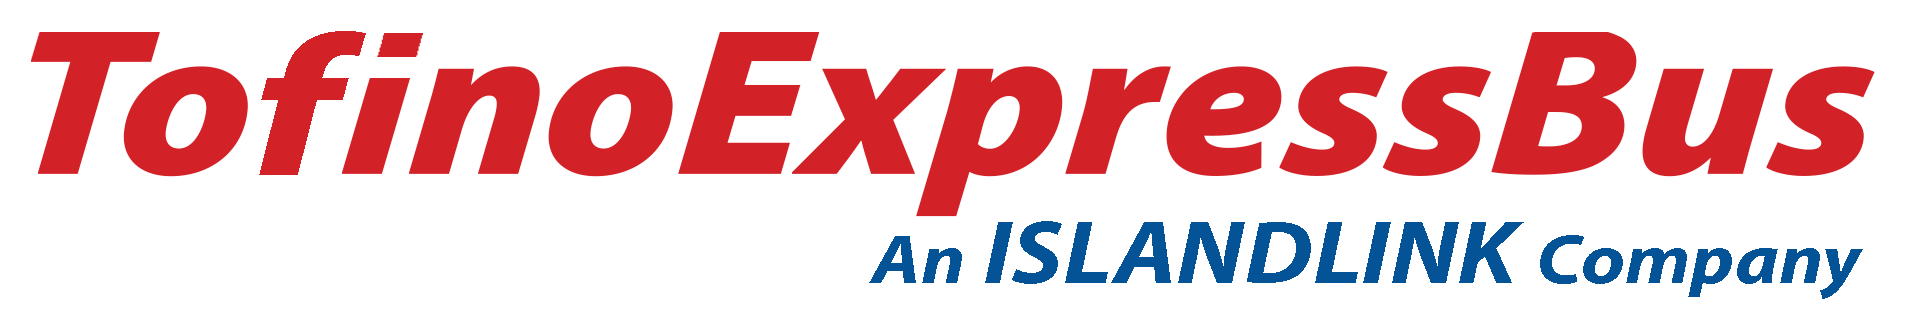 Tofino ExpressBus logo in red with text An ISLANDLINK Company below in blue